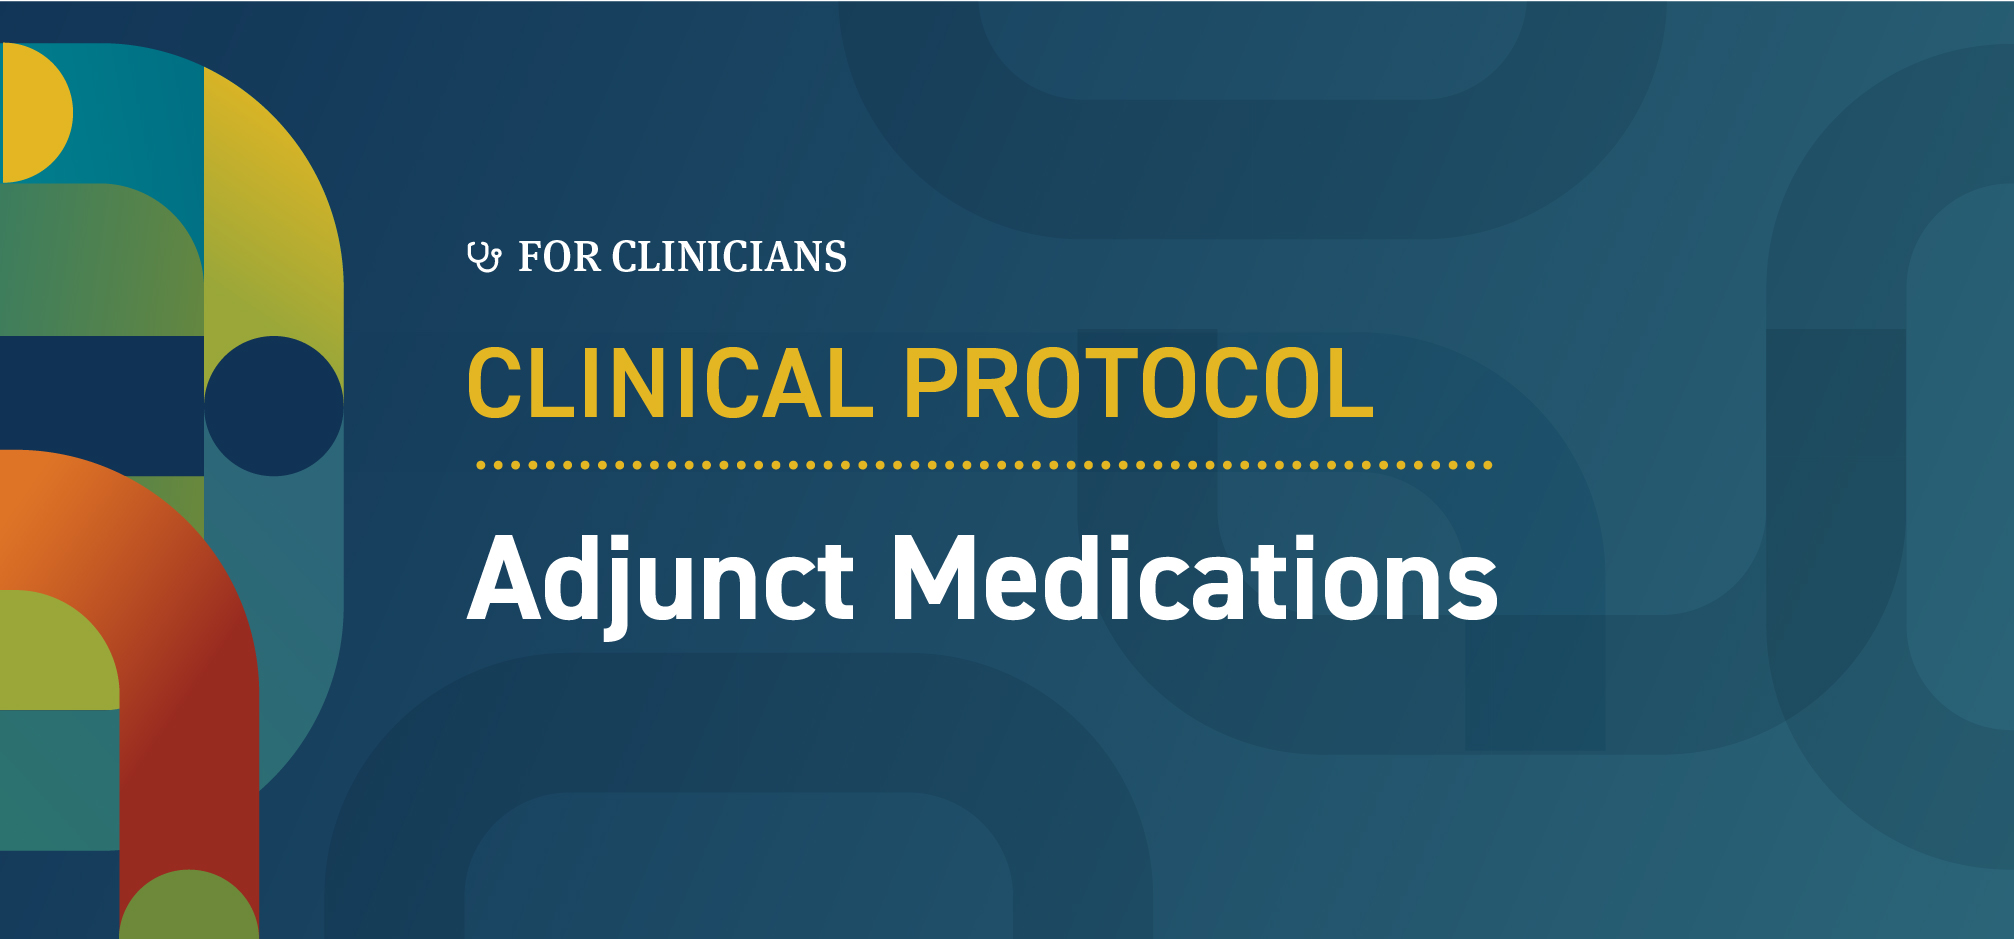 Clinical Protocol